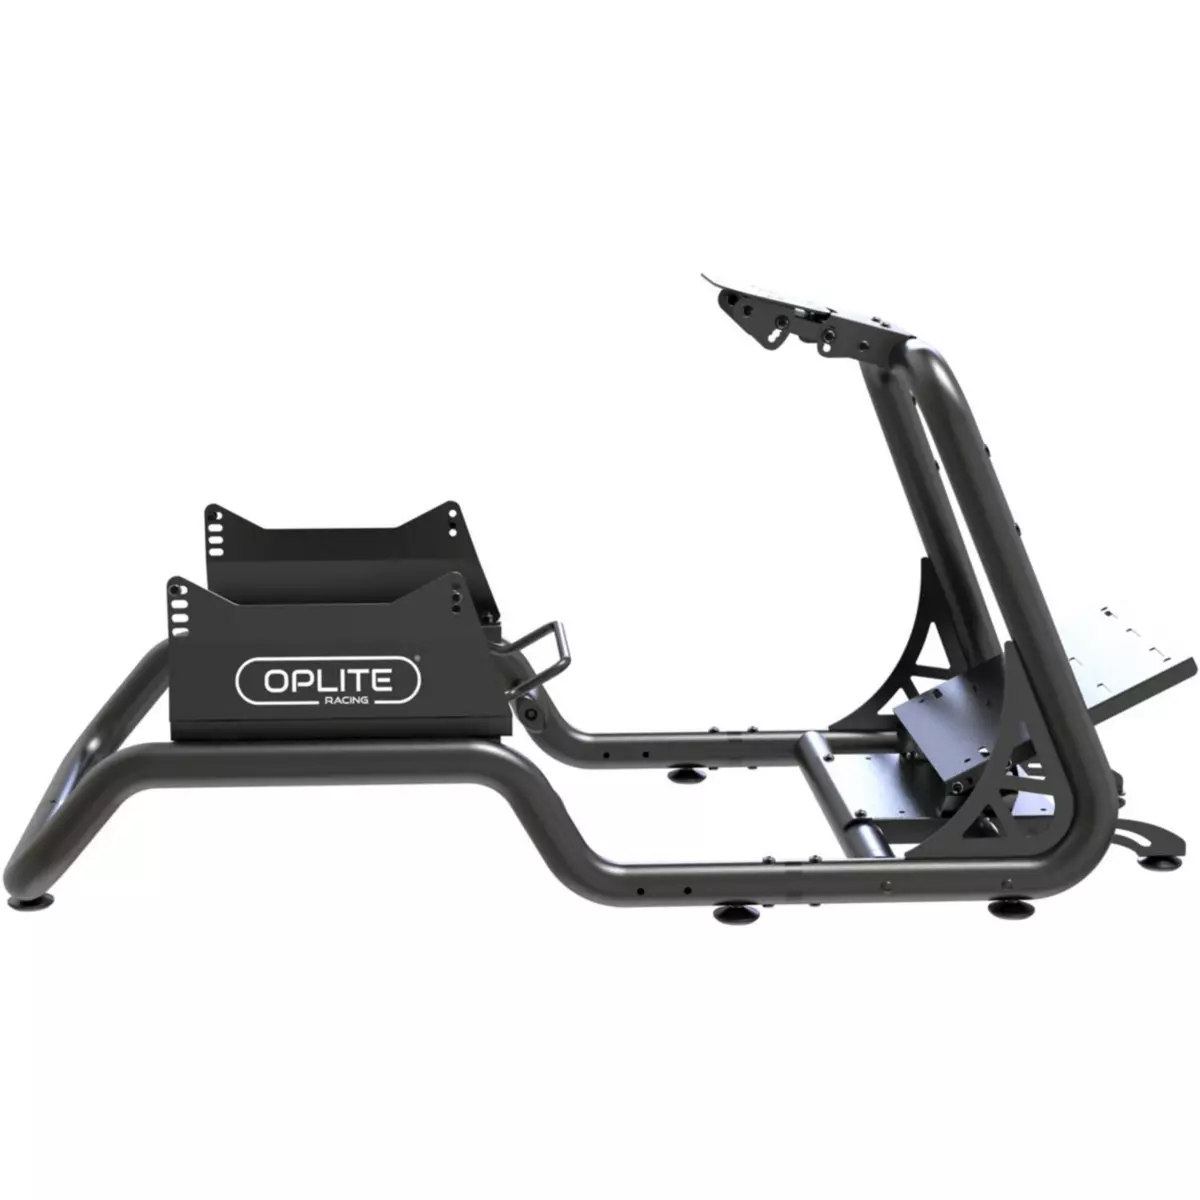 OPLITE Support GTR CHASSIS